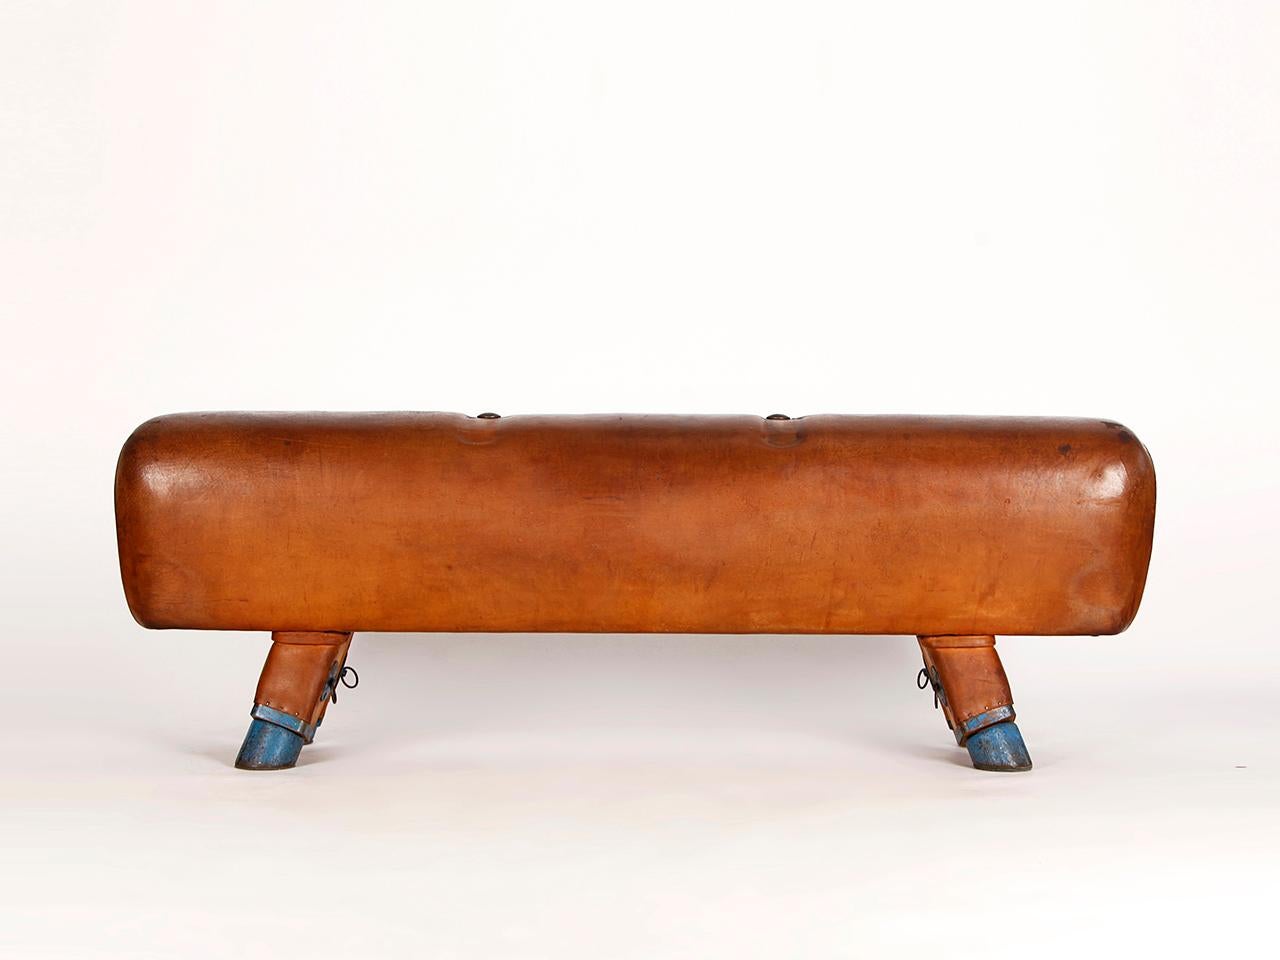 Industrial Gymnastic Leather Pommel Horse Bench, 1930s, Restored